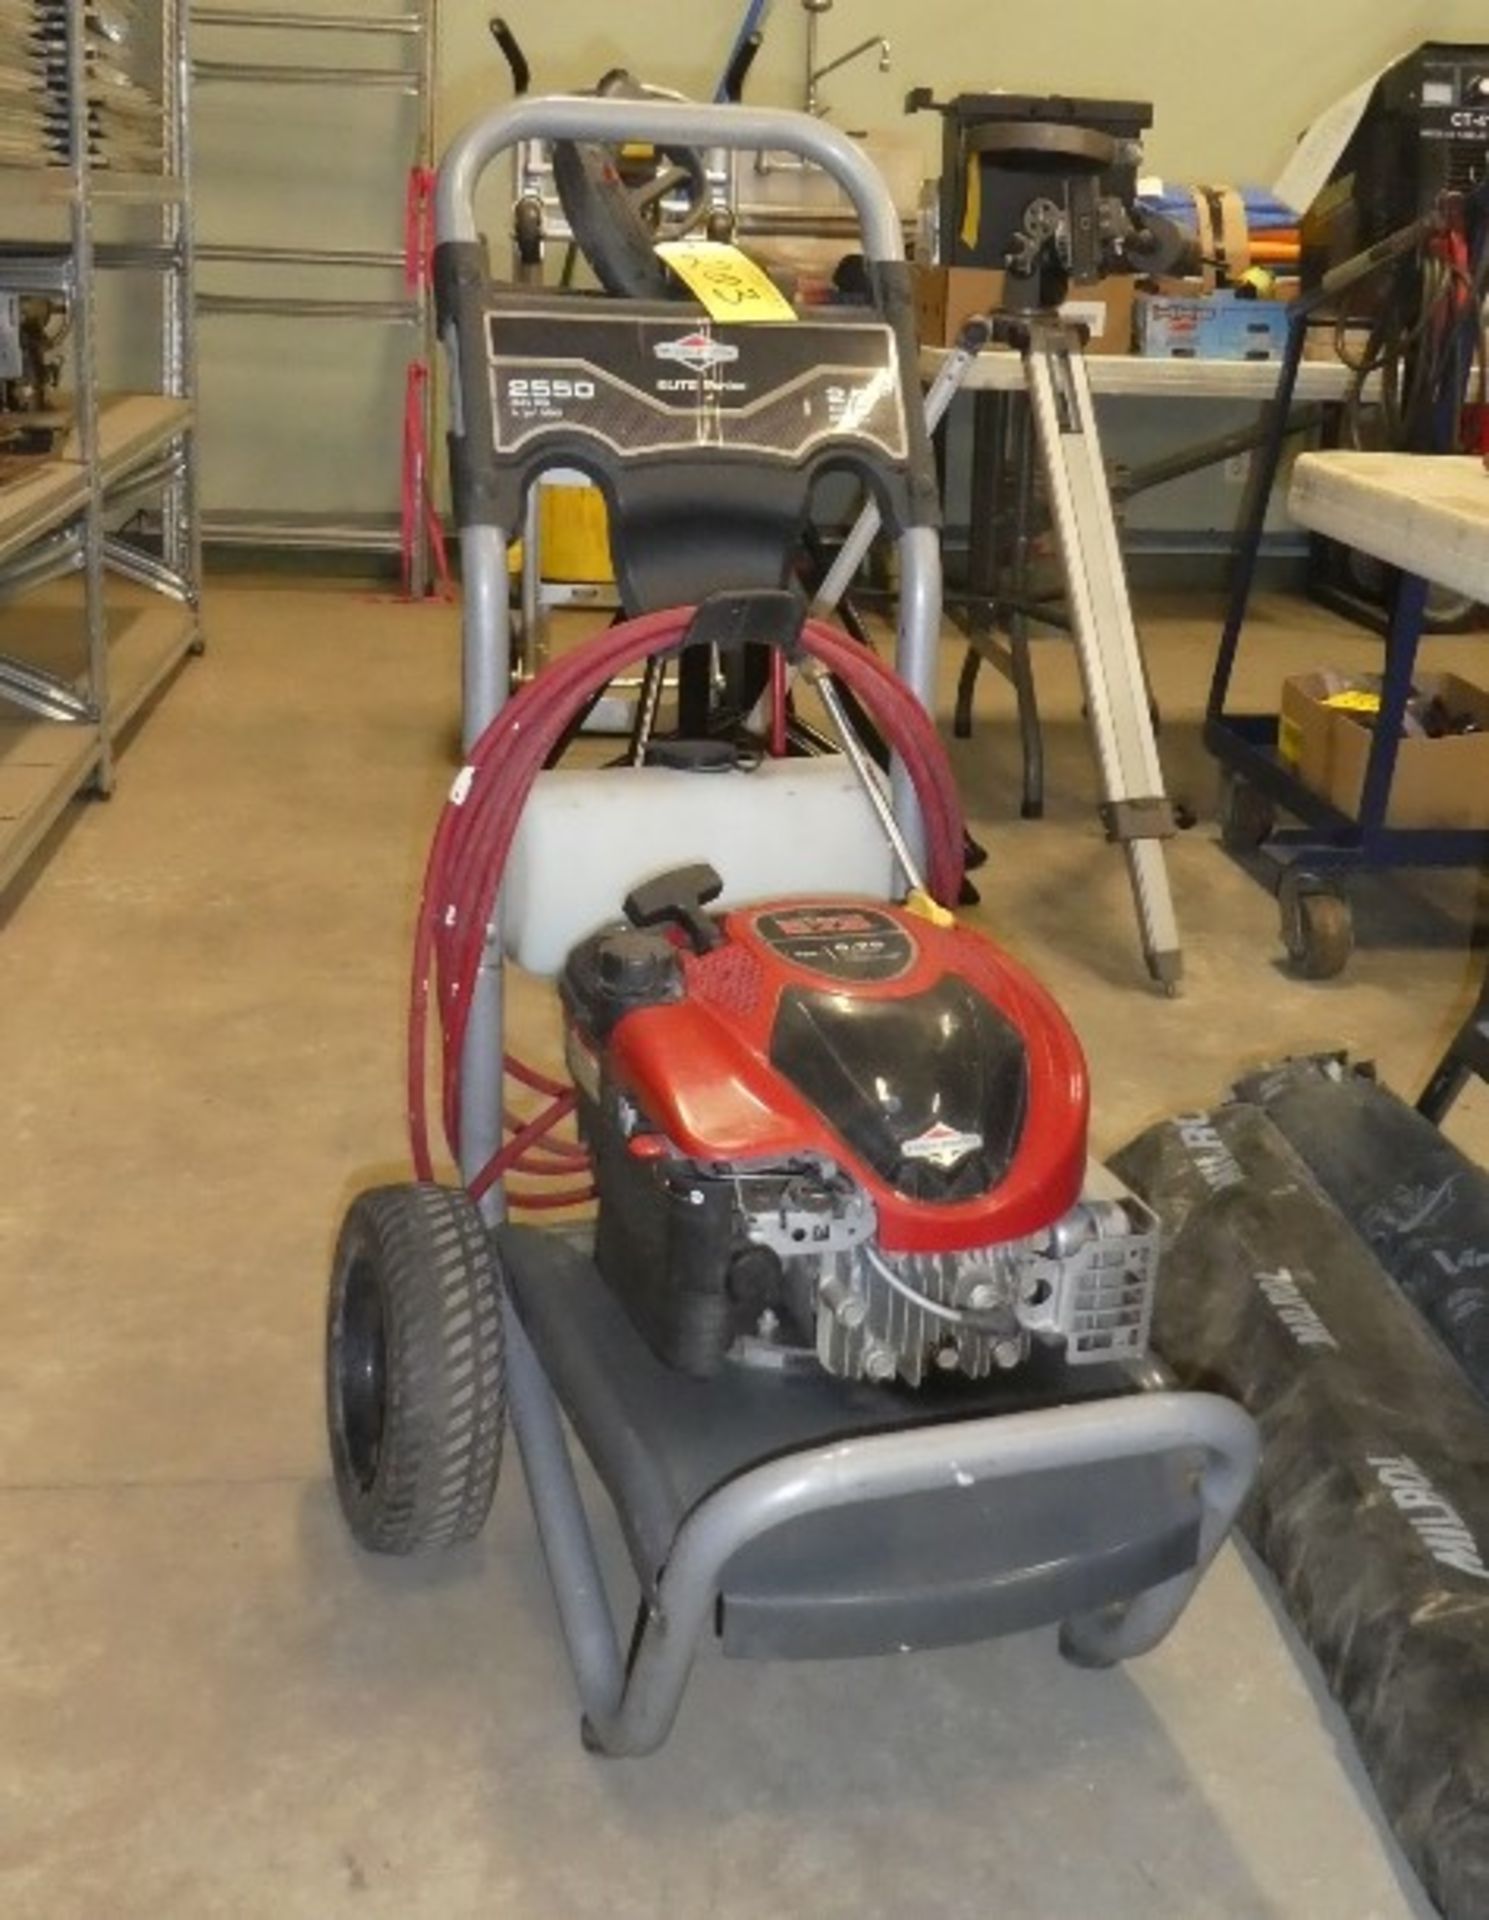 B & S ELITE SERIES GAS POWERED PRESSURE WASHER 2550 PSI 6.75HP - Image 2 of 2